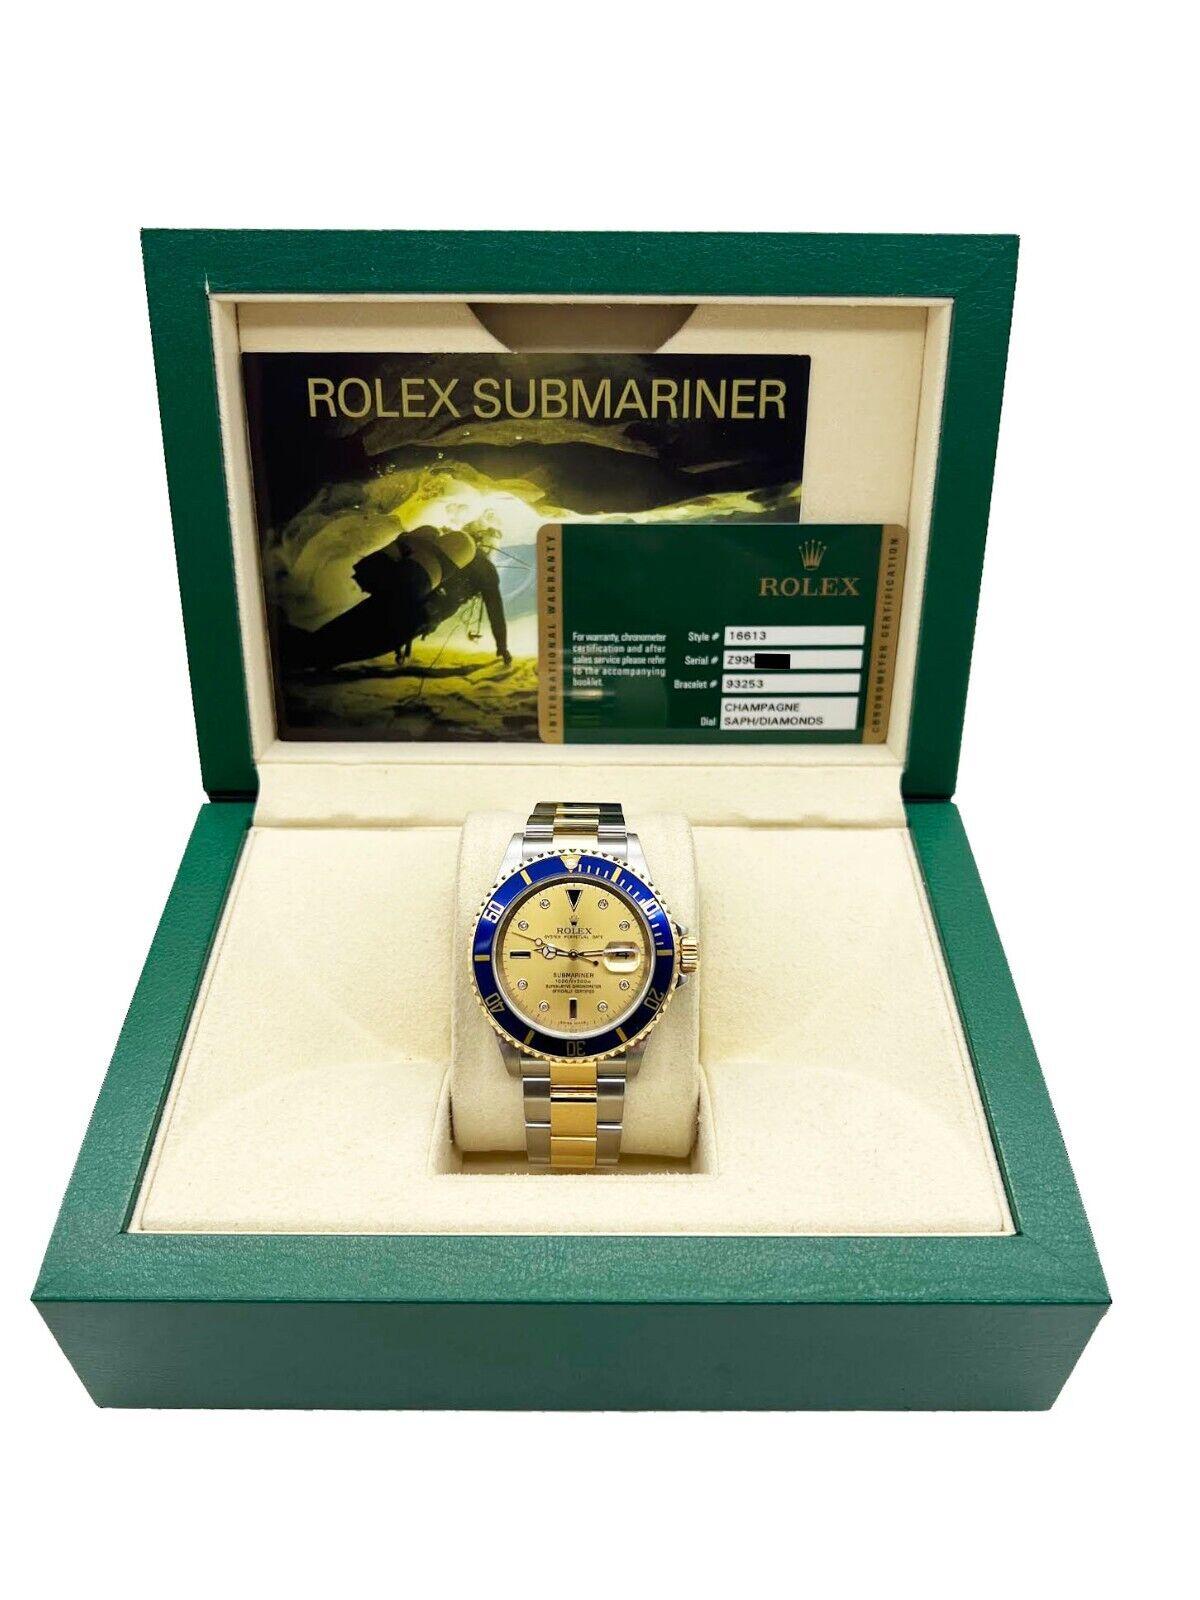 Rolex Submariner 16613 Champagne Serti Dial 18K Yellow Gold Steel Box Paper In Excellent Condition For Sale In San Diego, CA